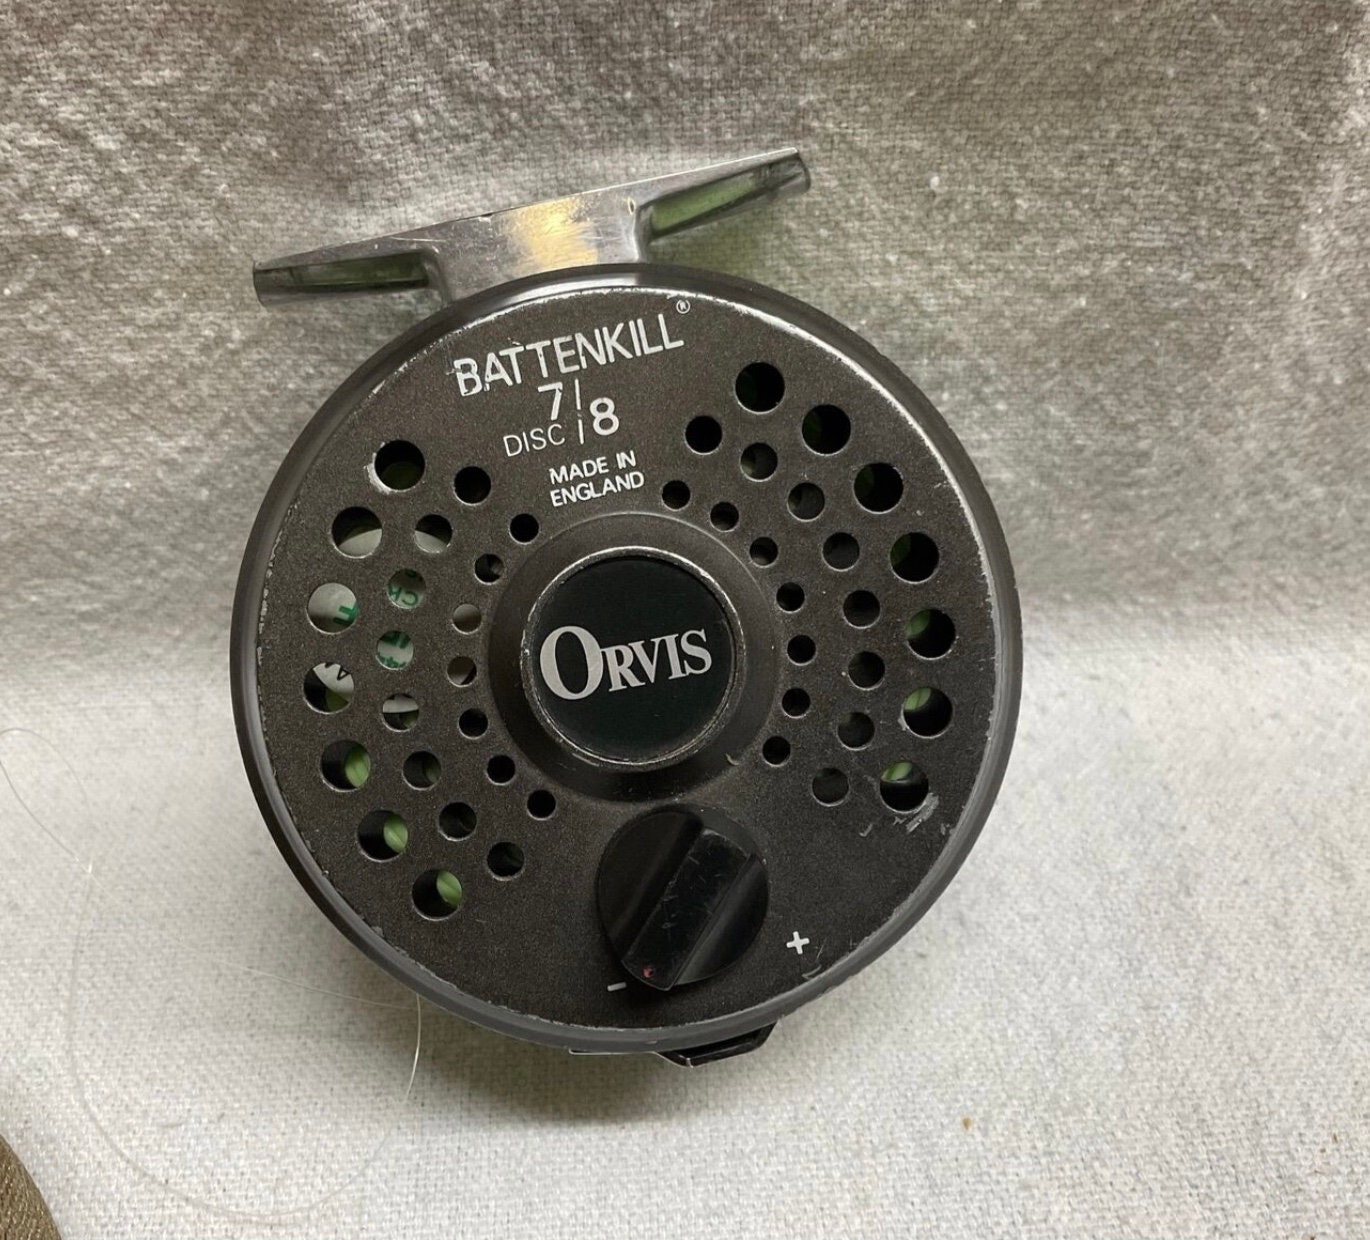 Vintage Orvis Battenkill 7/8 Disc Fly Reel and Orvis Clamshell